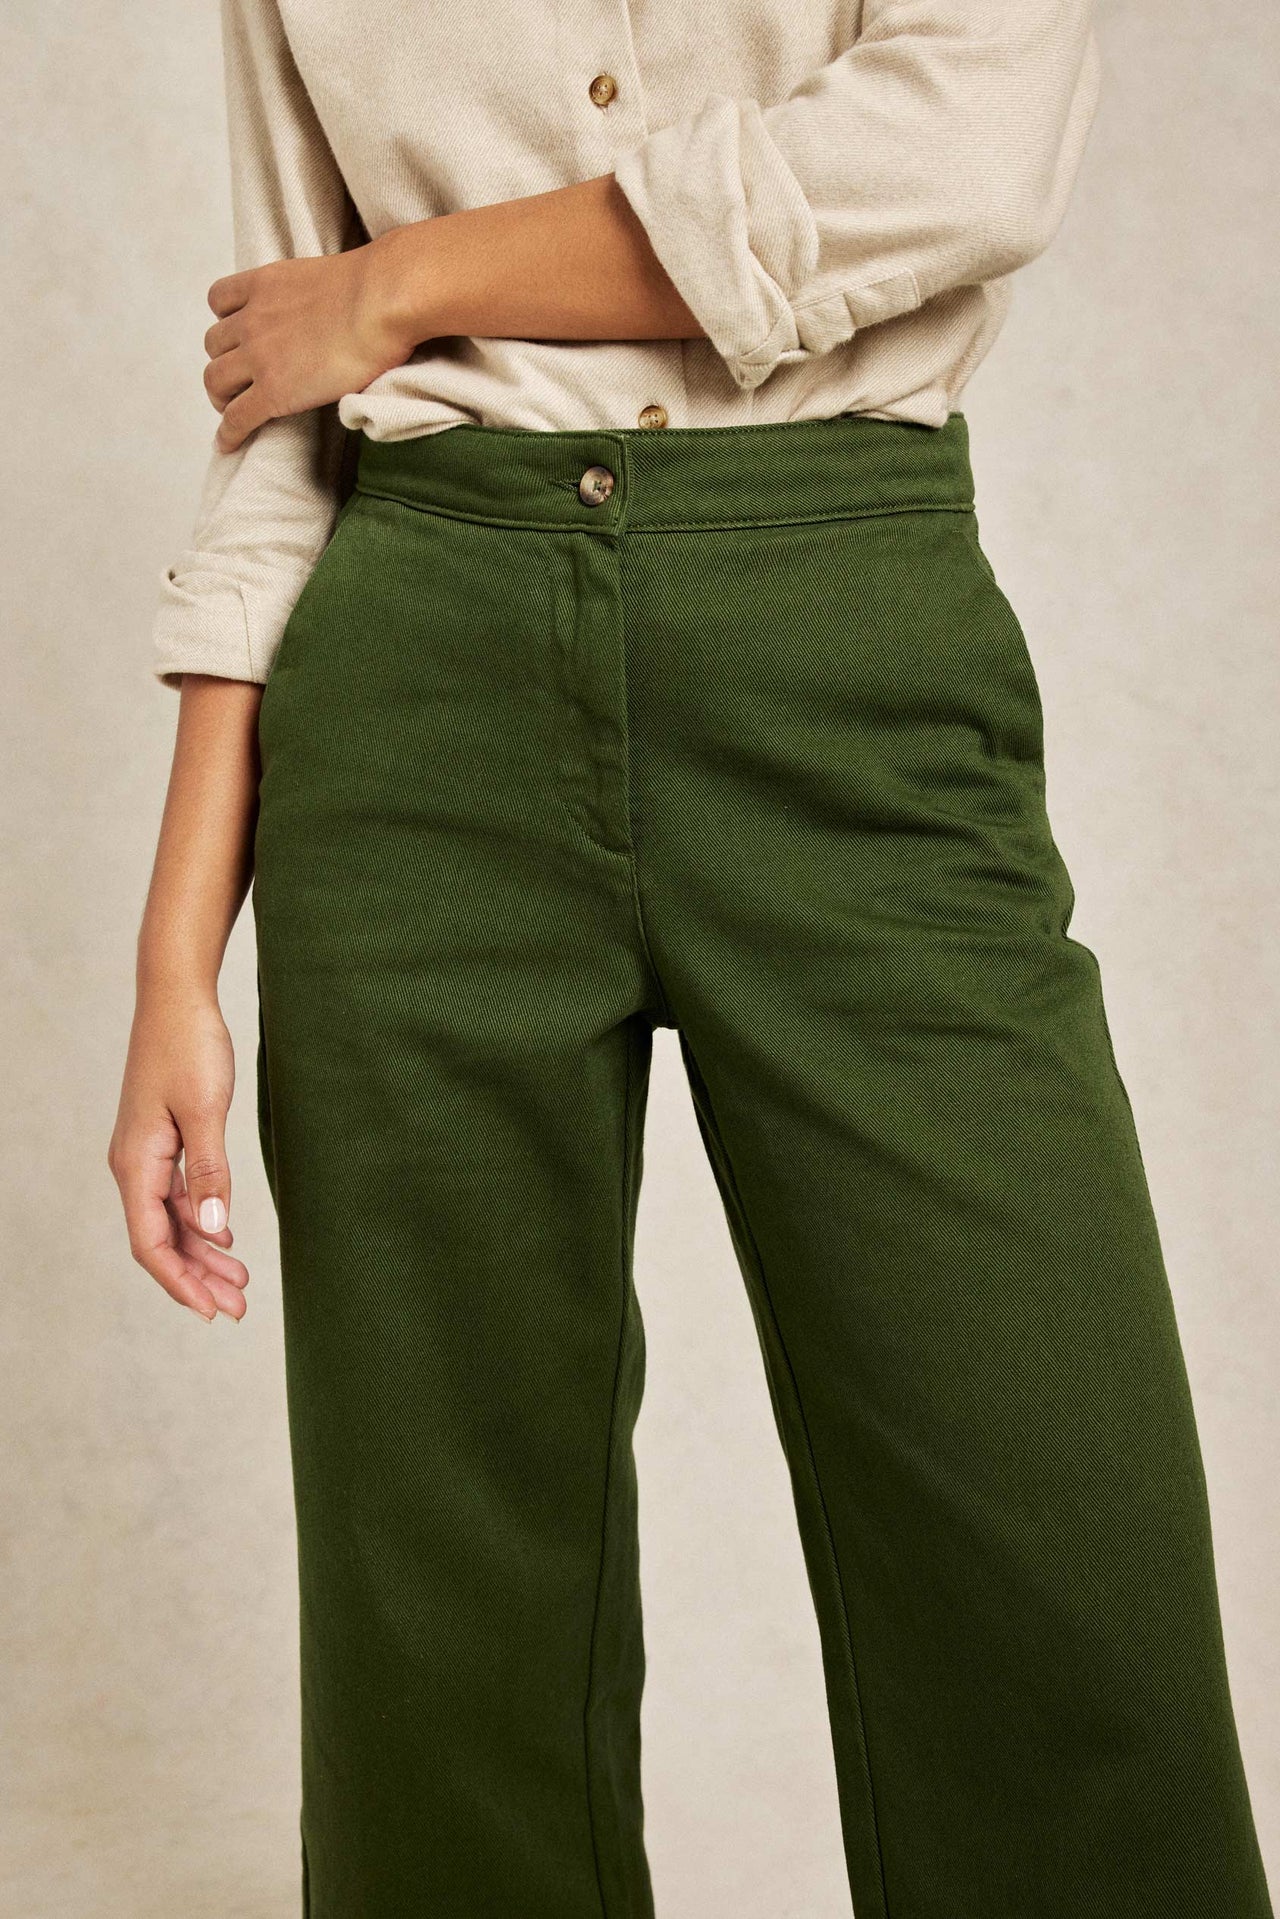 Mid-rise wide leg khaki green cropped women’s trousers with added stretch. Cut from cotton to a mid-rise fit. Casual wear. Size 6,8,10,12,14,16,18. Made in Portugal. Machine wash.